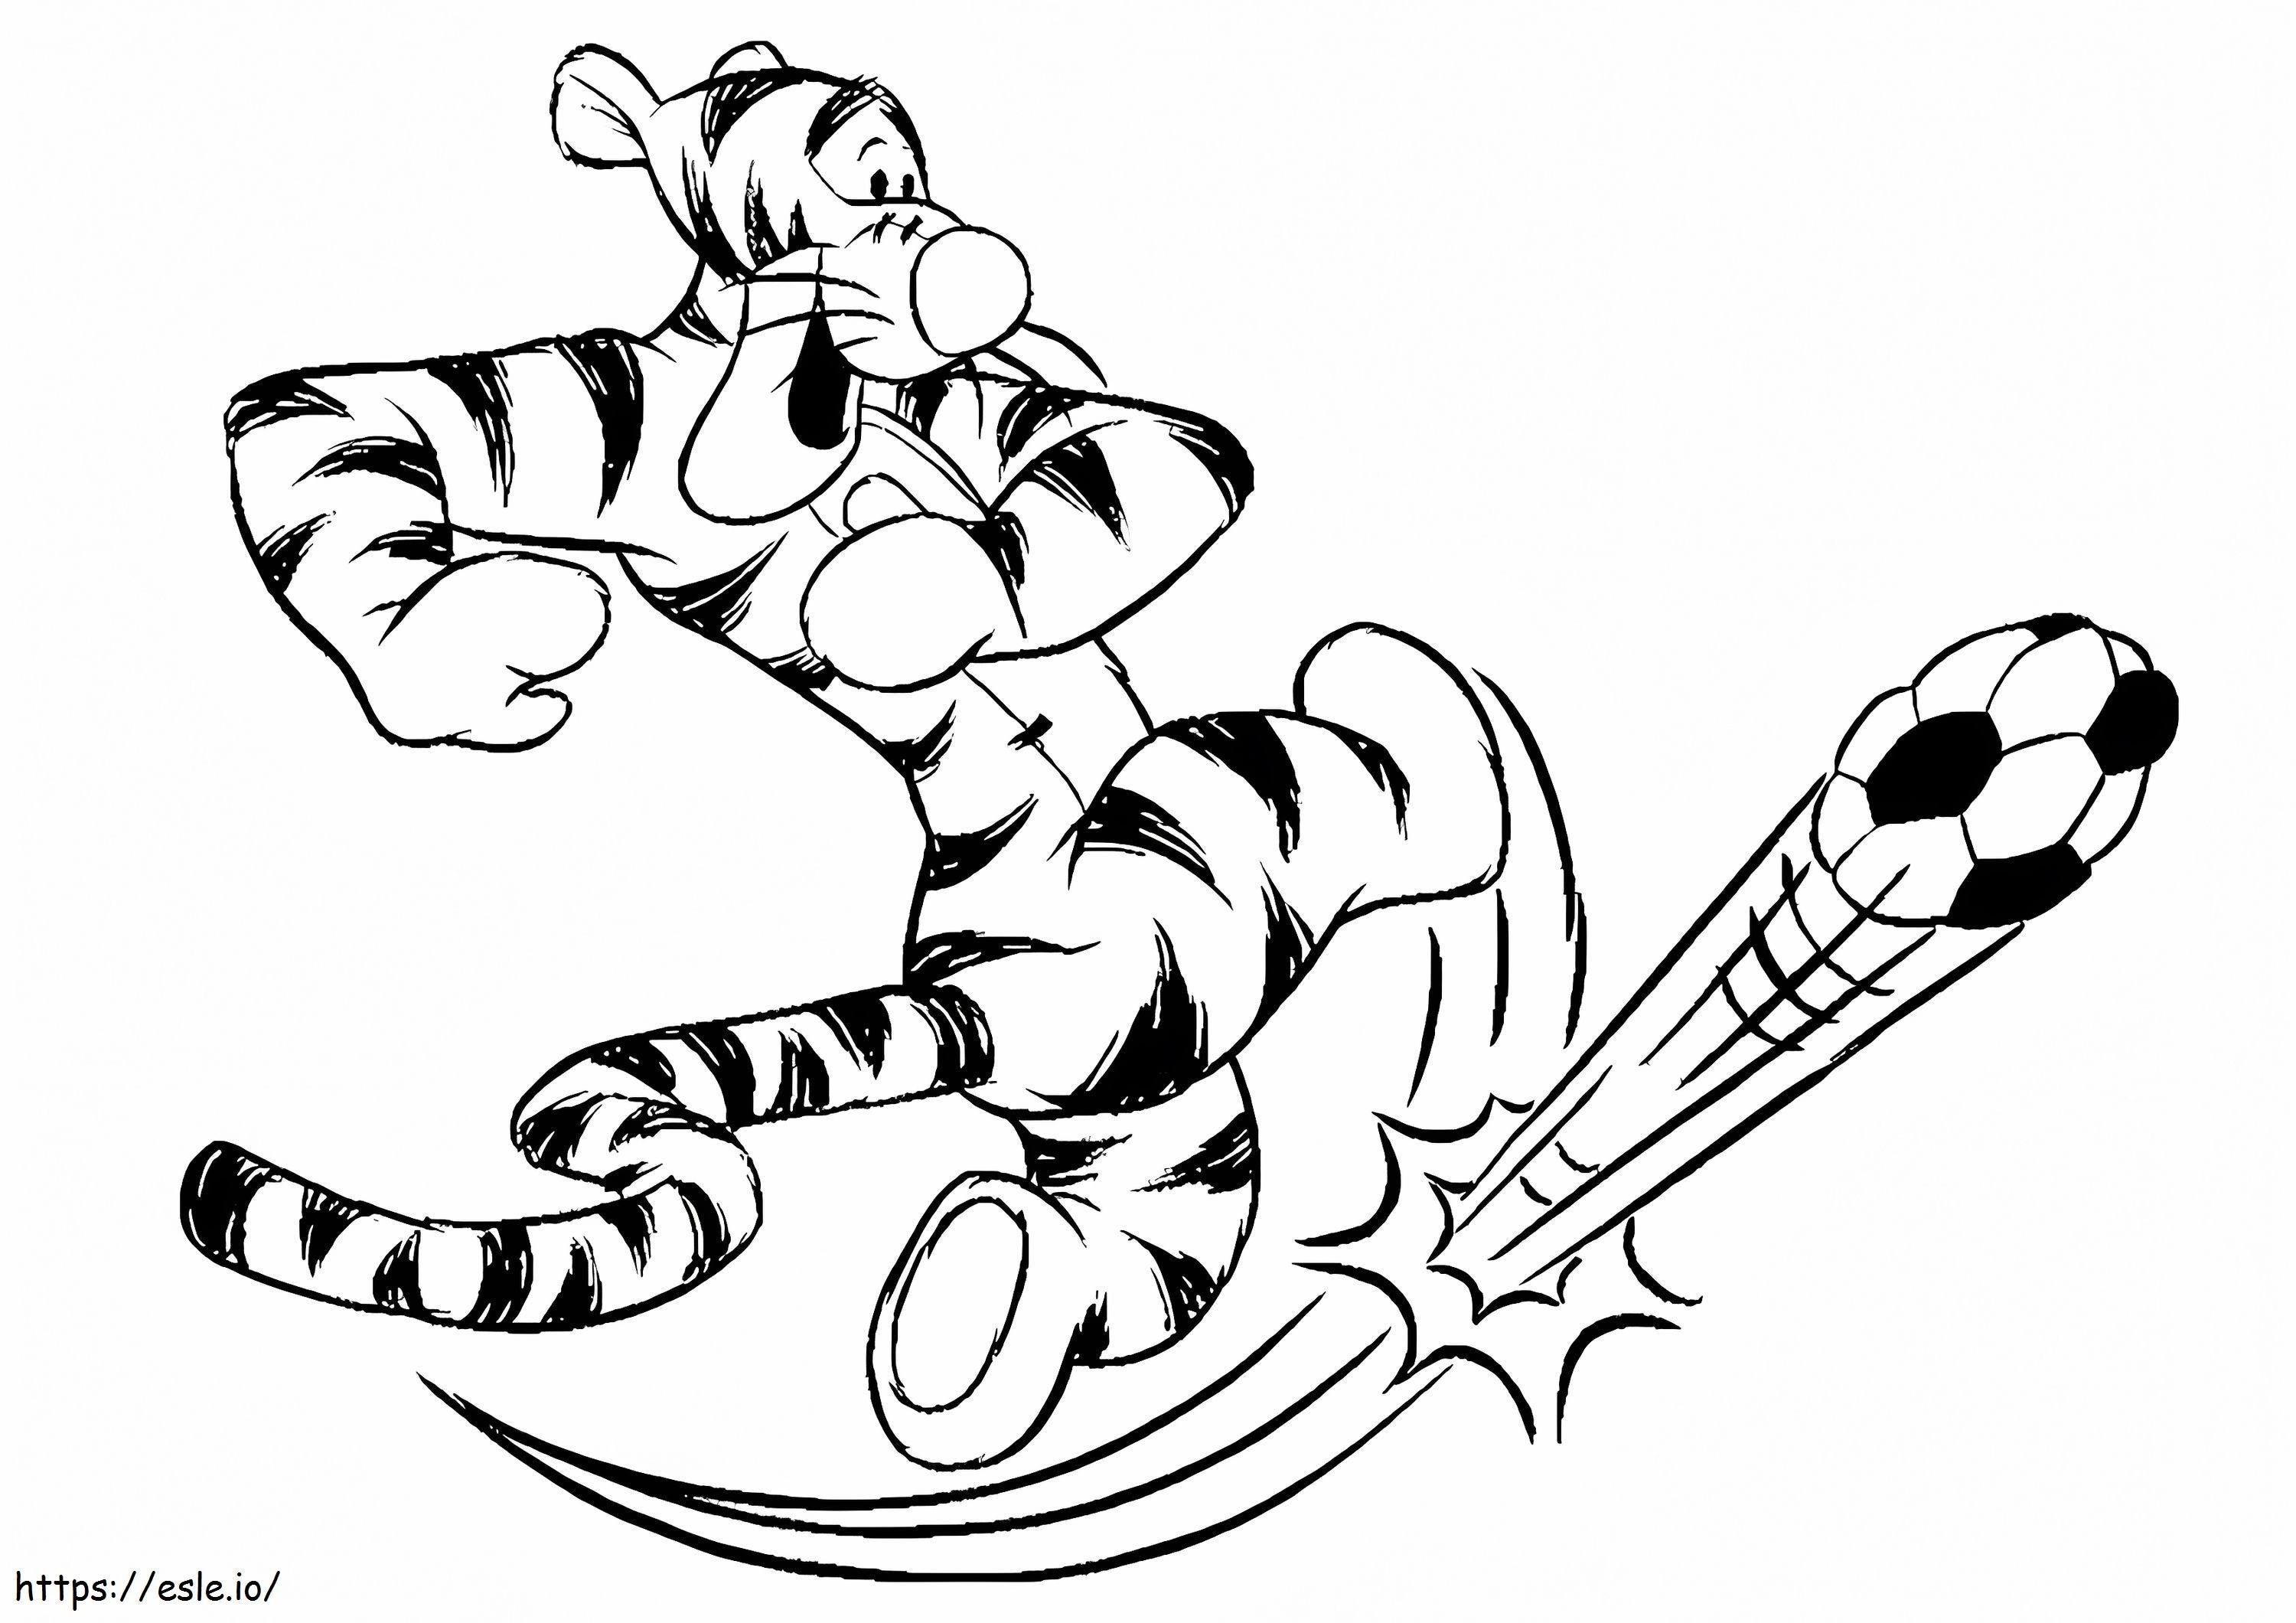 1526205517 Tigger Playing Soccer A4 E1600676698651 coloring page